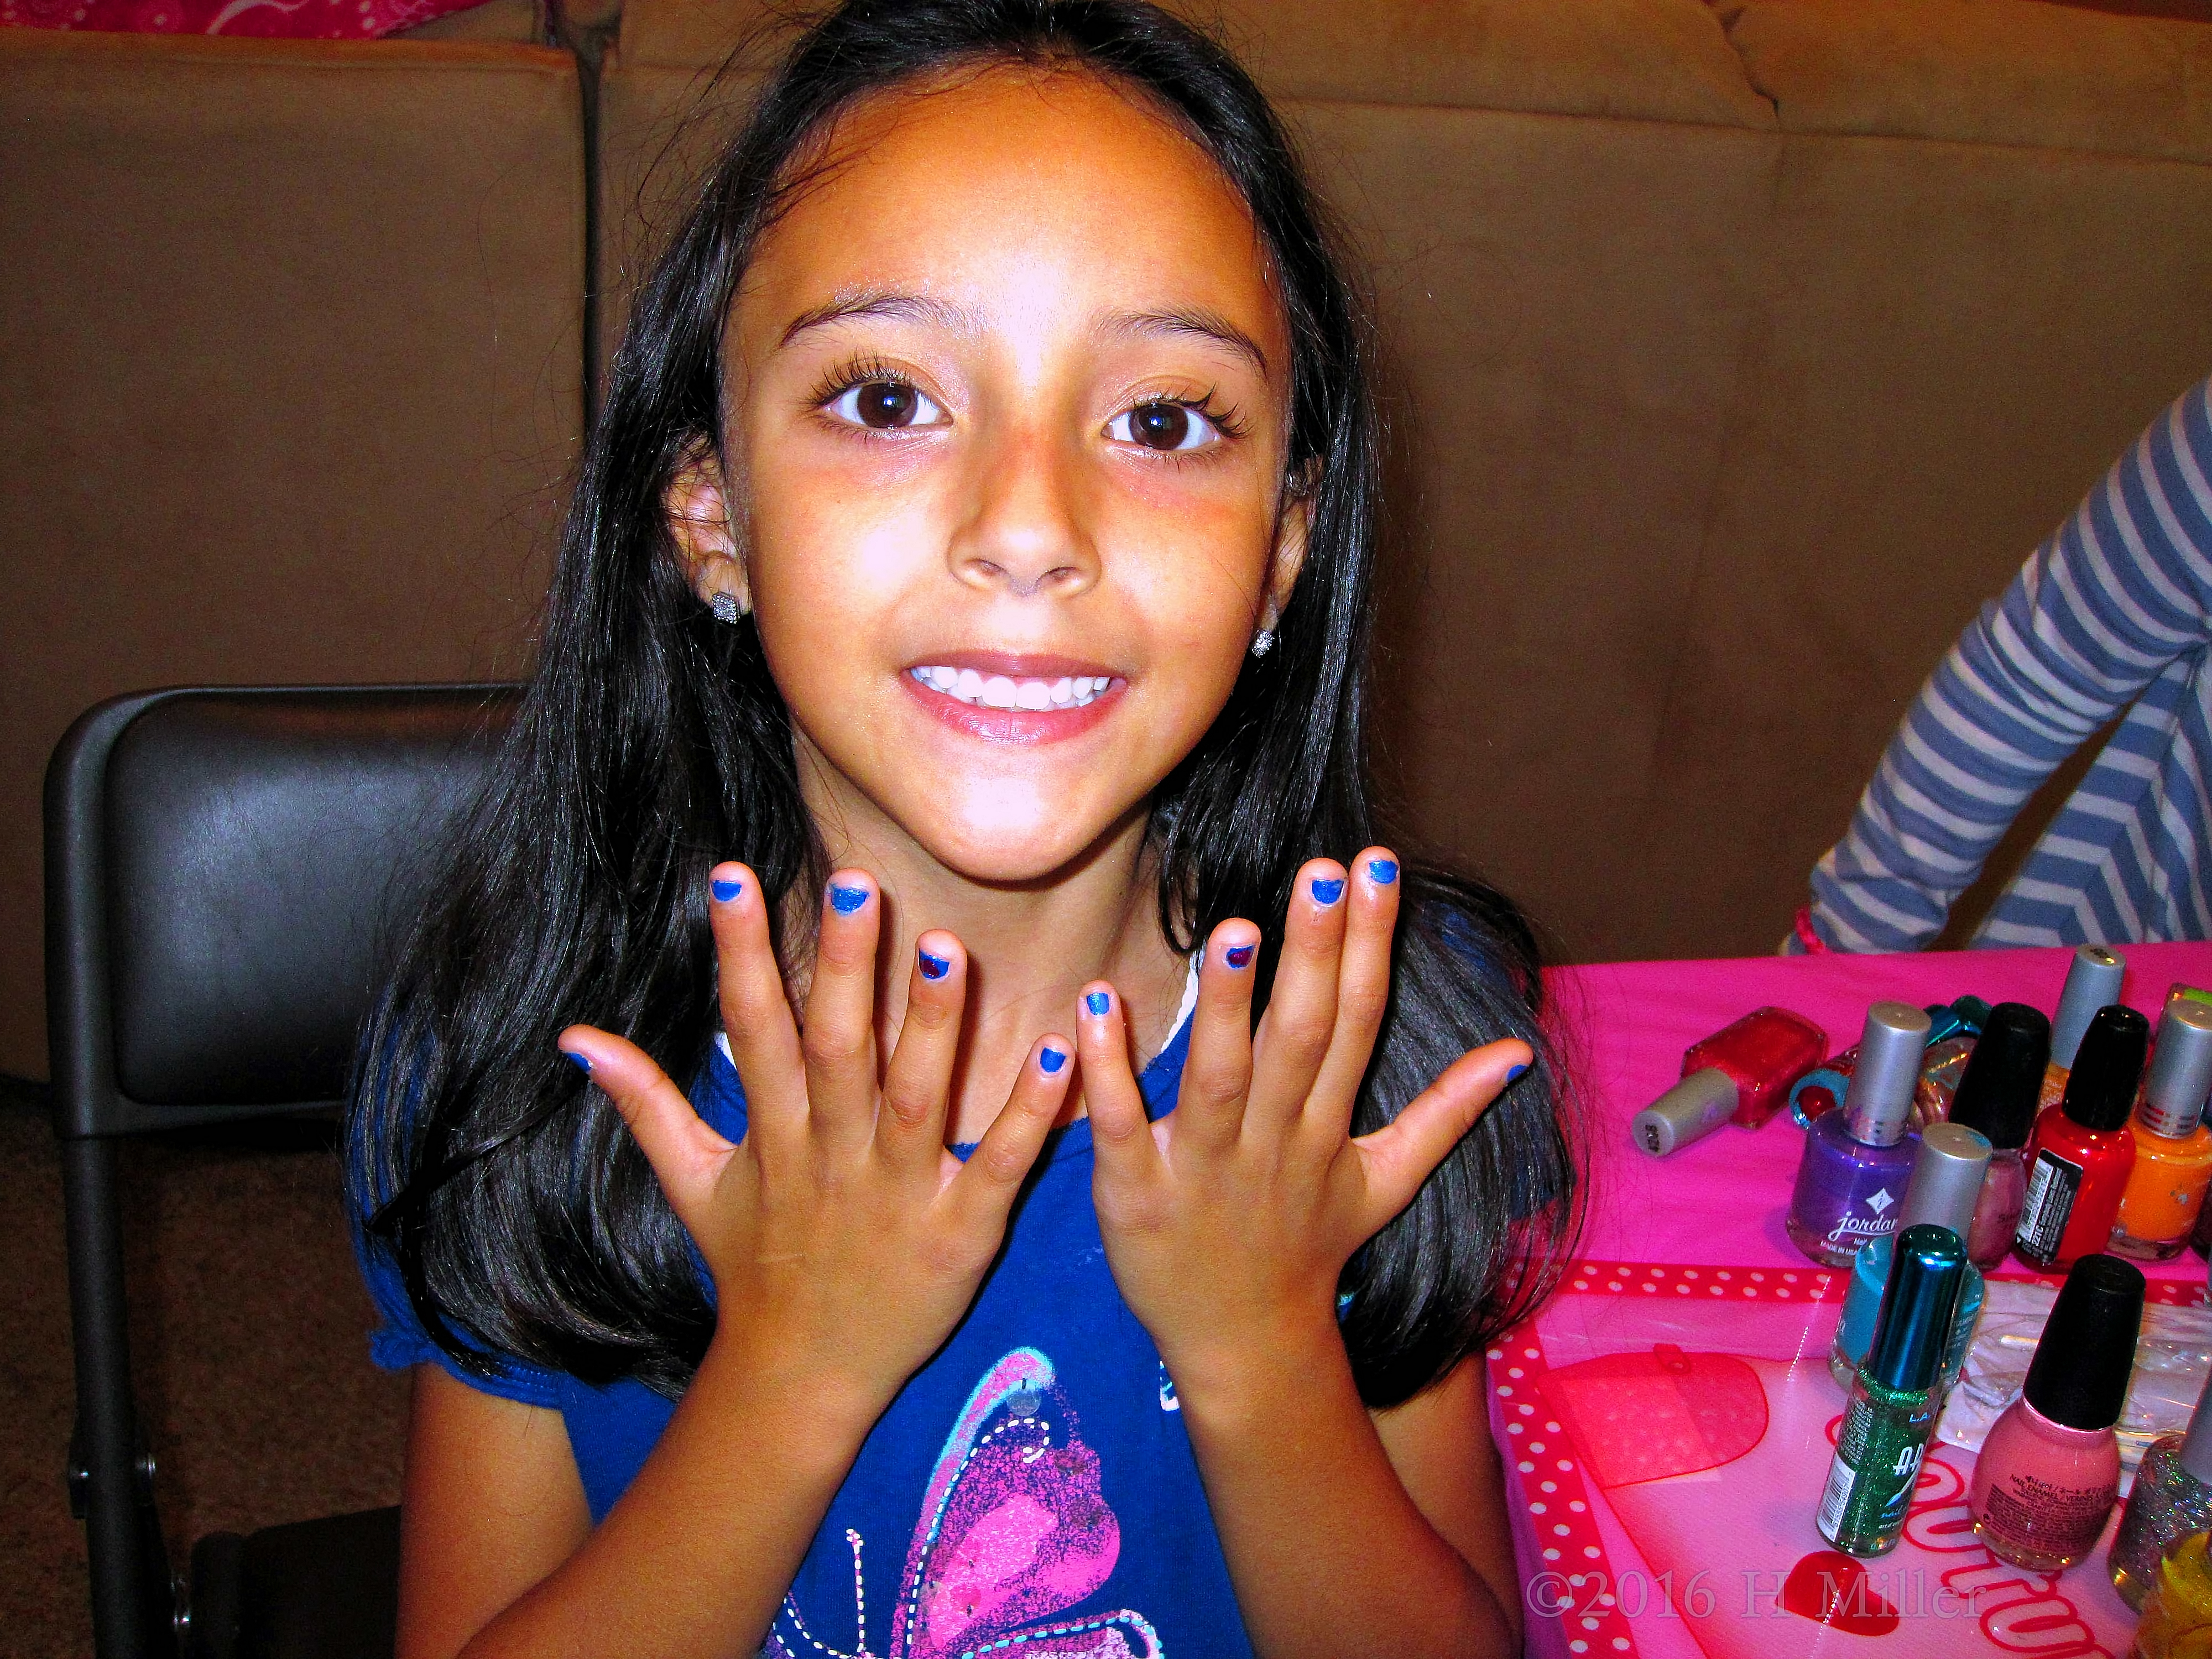 Awesome! Her Blue Kids Manicure Is Gorgeous!